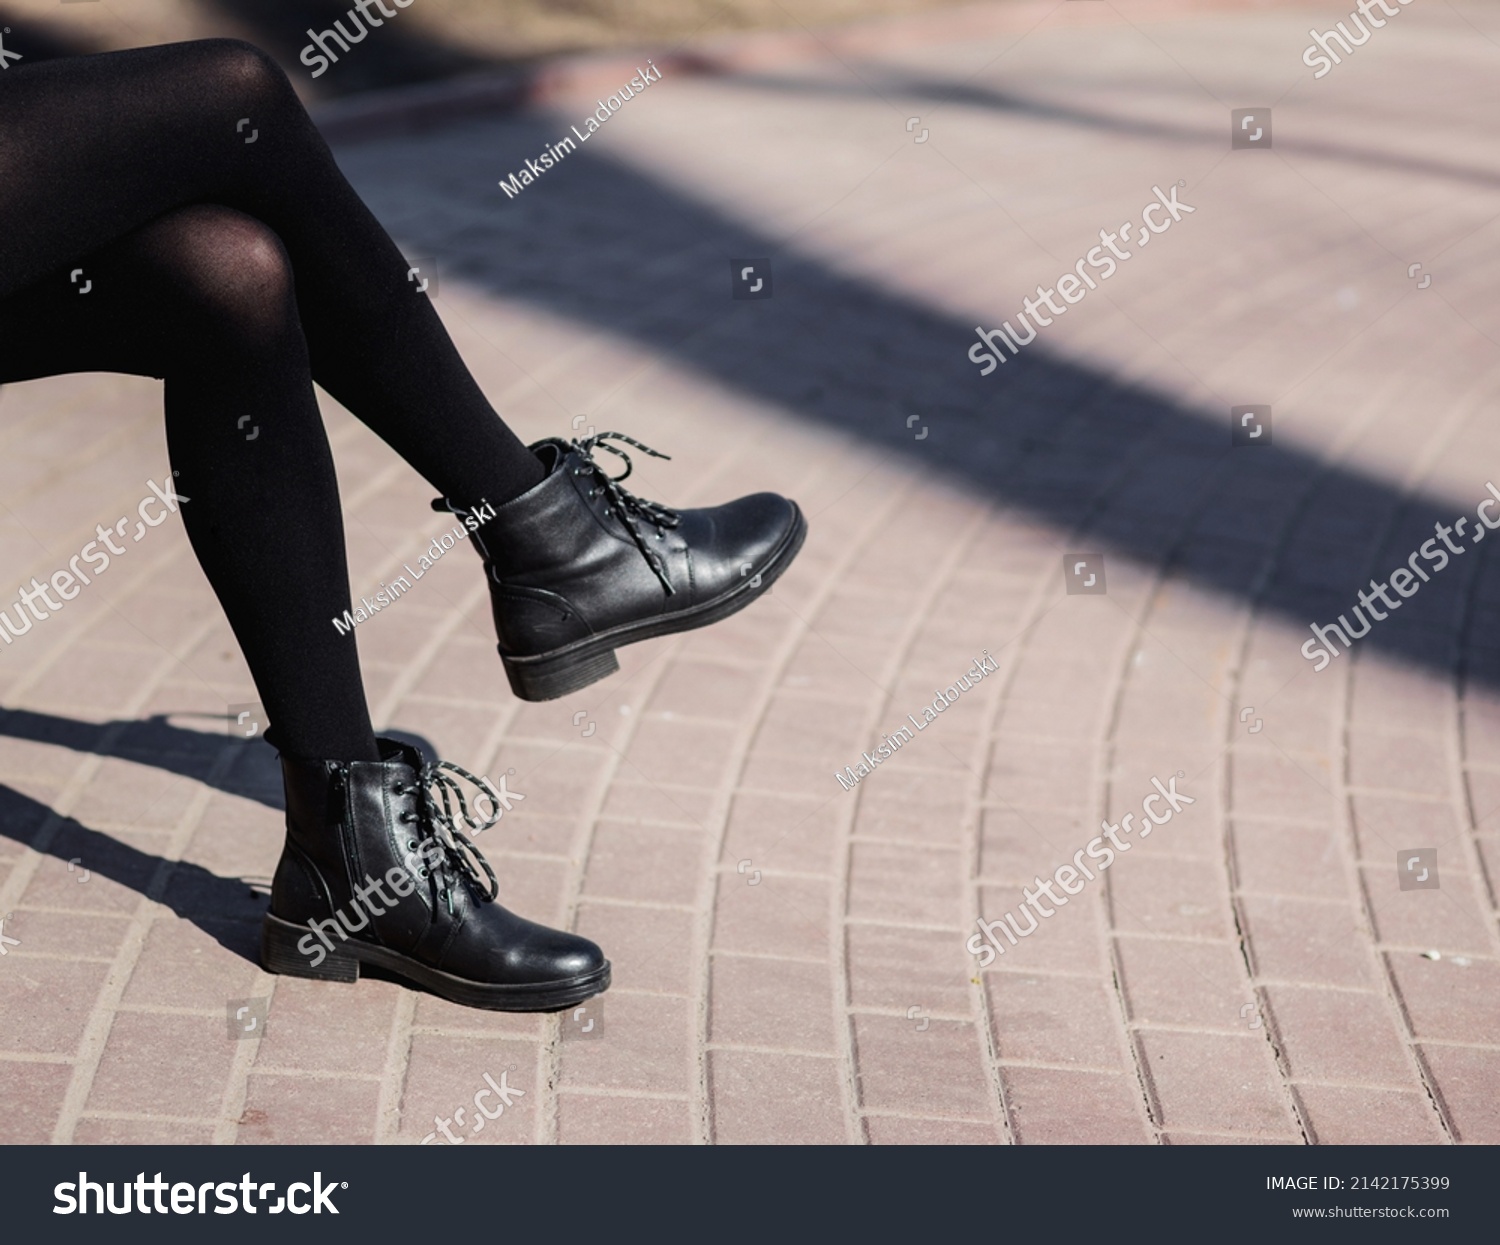 2,951 Boots pantyhose Images, Stock Photos & Vectors | Shutterstock